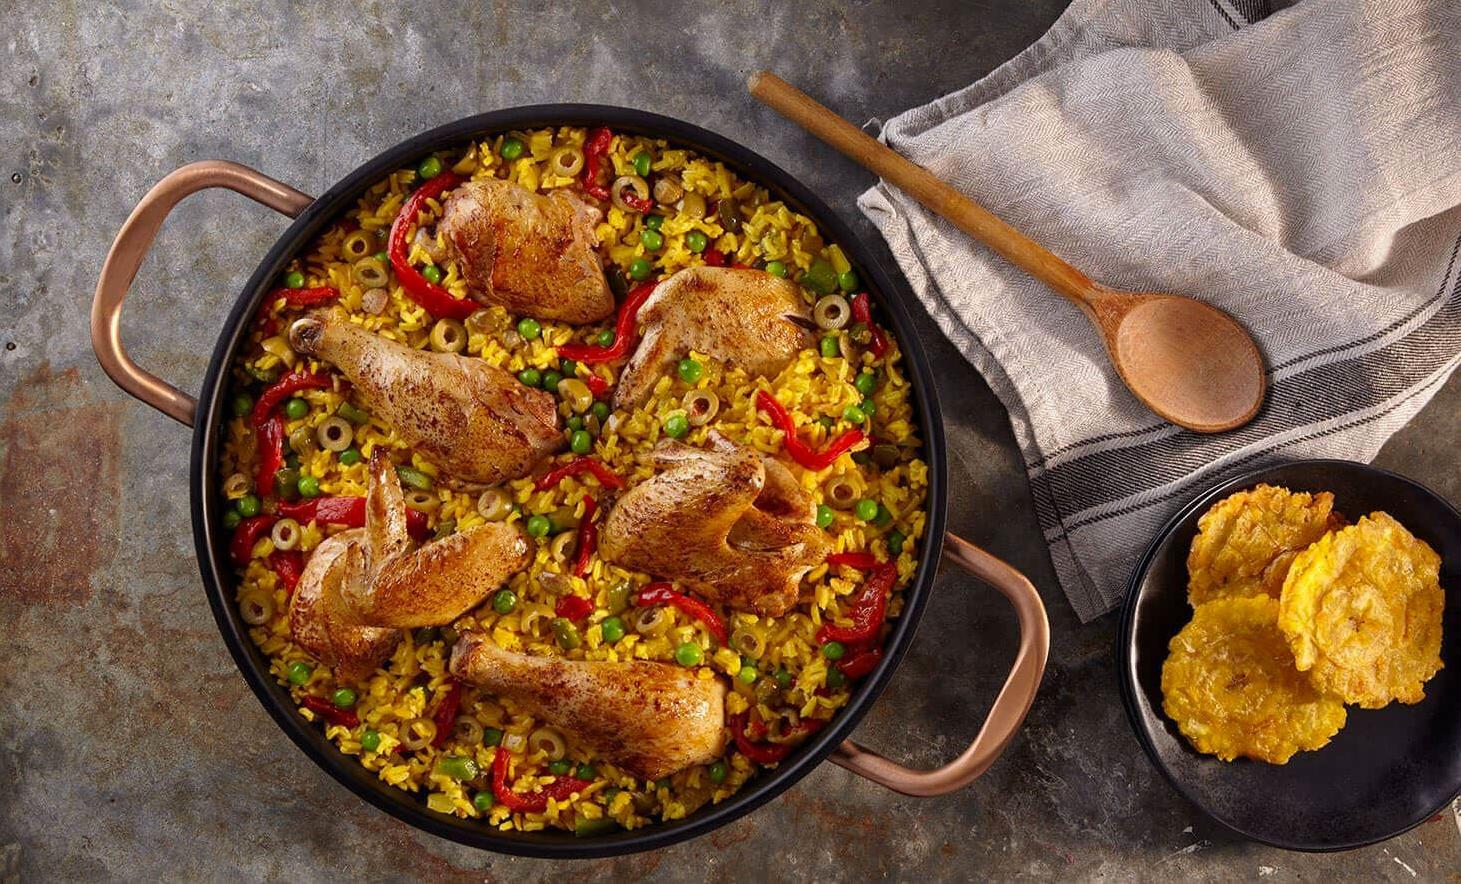  Chicken and rice cooked to perfection, seasoned with Latin spices for the ultimate flavor!